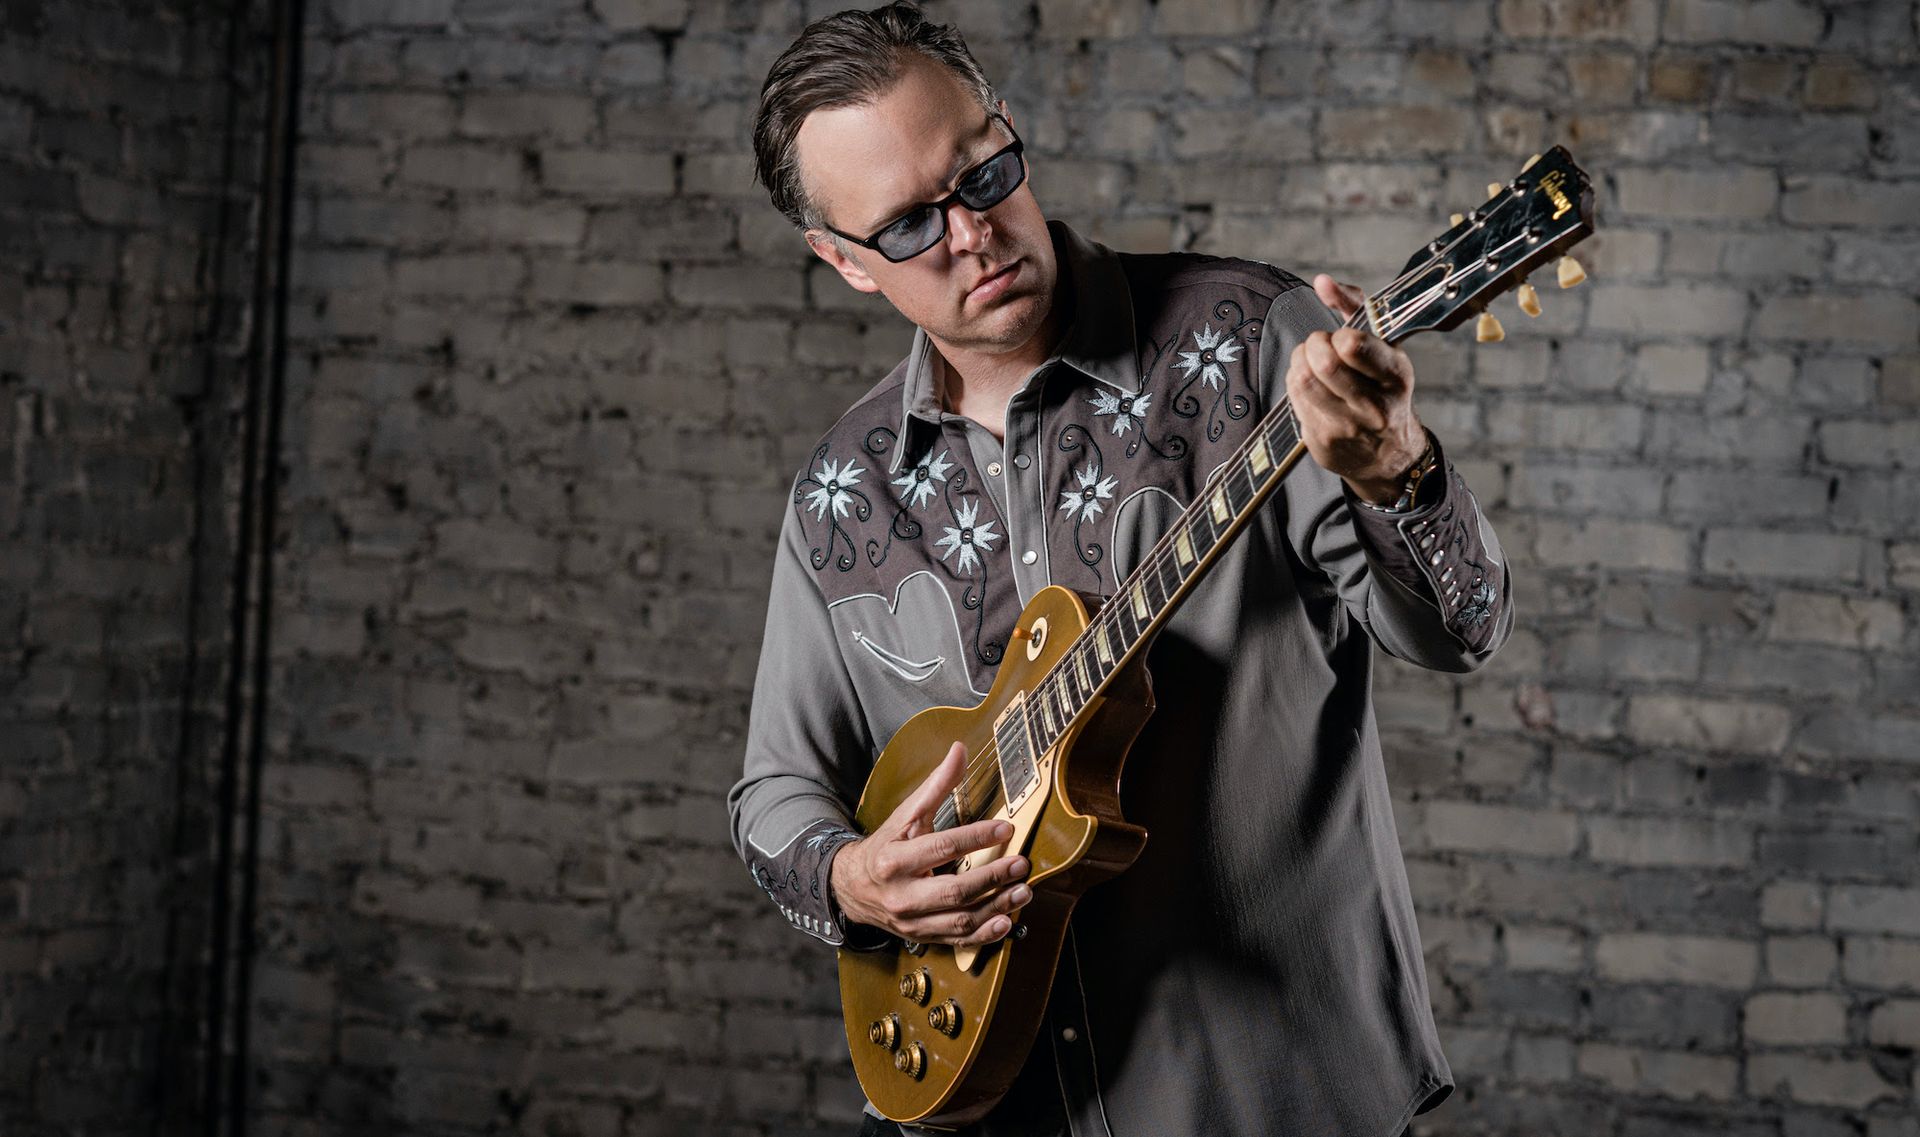 Joe Bonamassa shows you his tips and tricks for soloing over a minor blues.